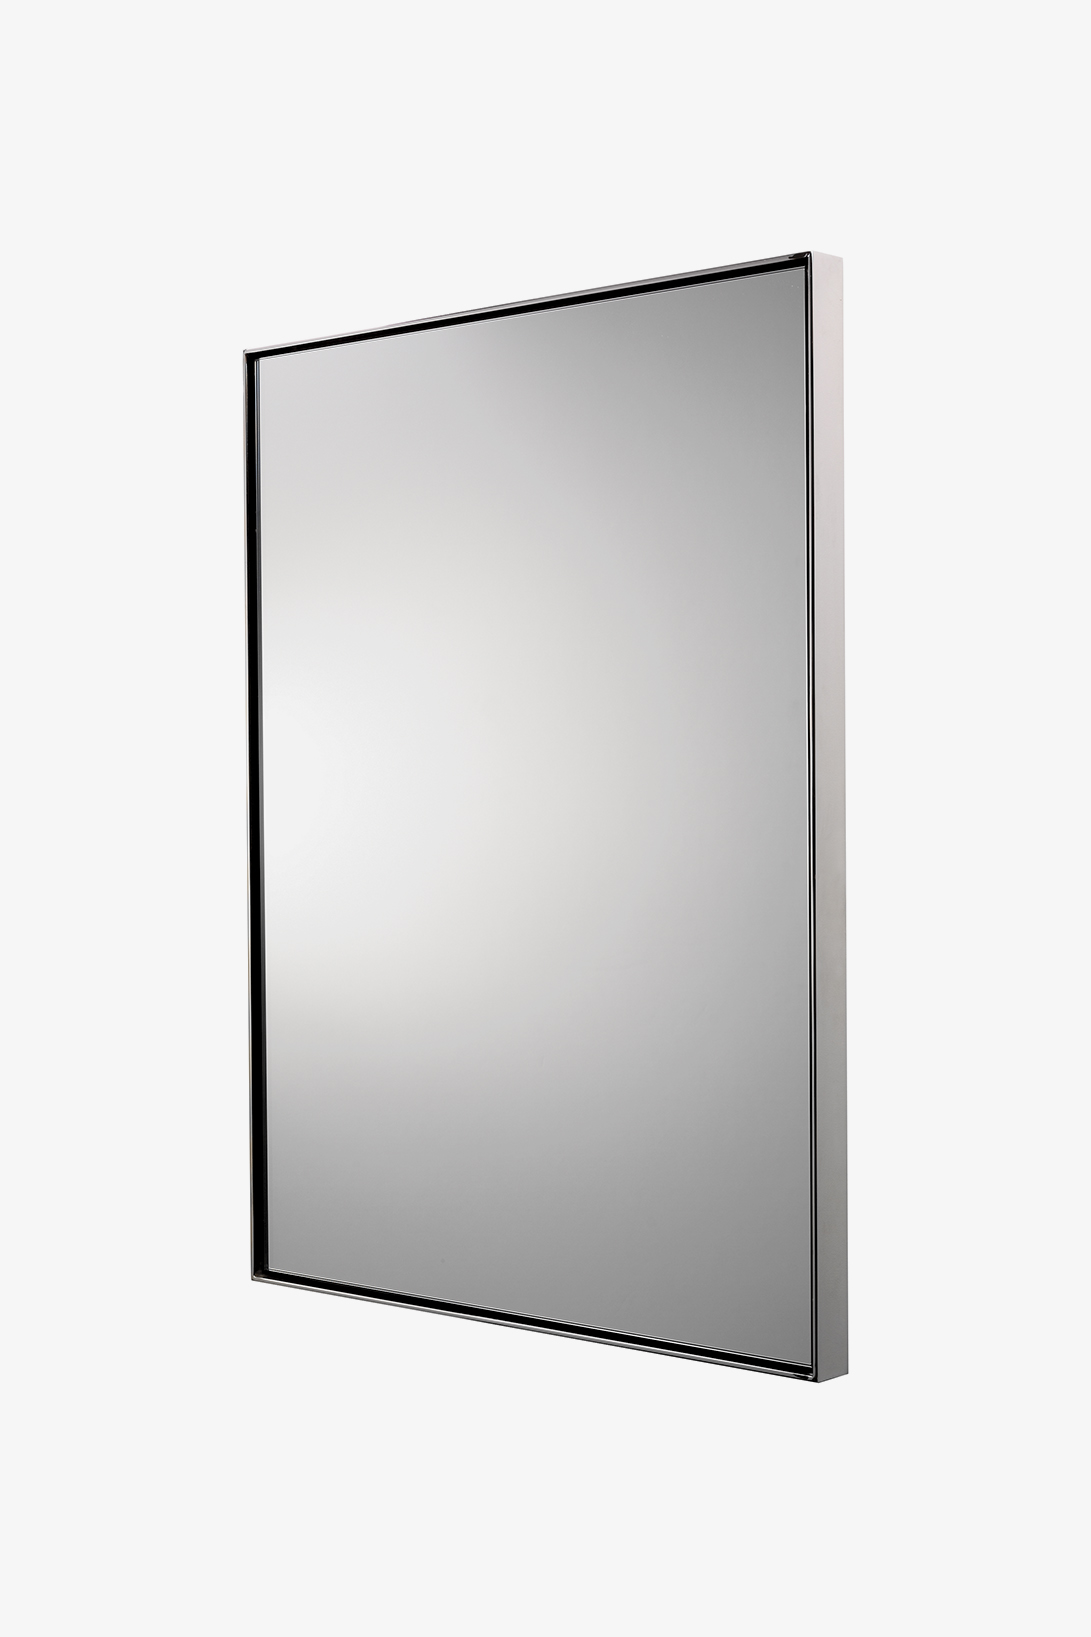 Opus Metal Wall Mounted Stationary Mirror